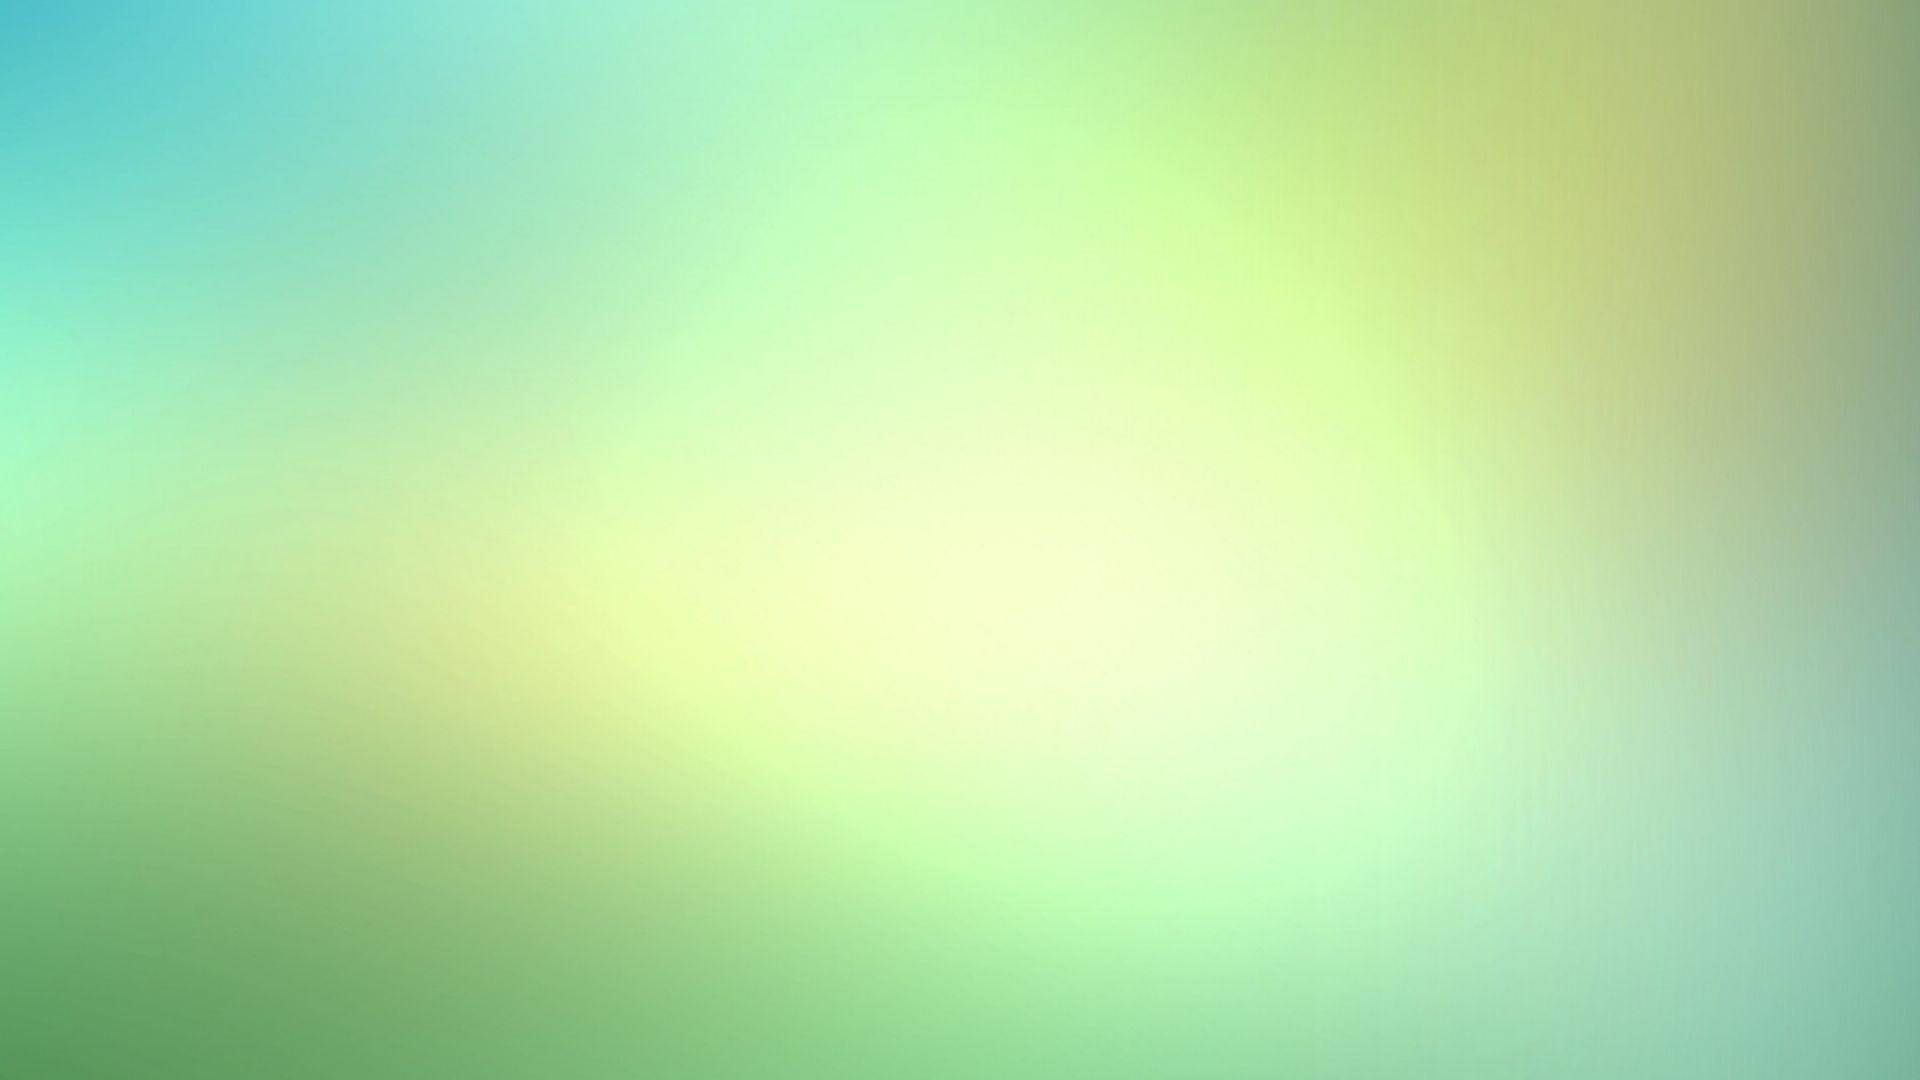 Download 1920x1080 Green And Blue Gradient, abstract, background, blurred, color, no people, studio shot, white, JPG, PNG, 1920x1080 - Blurry